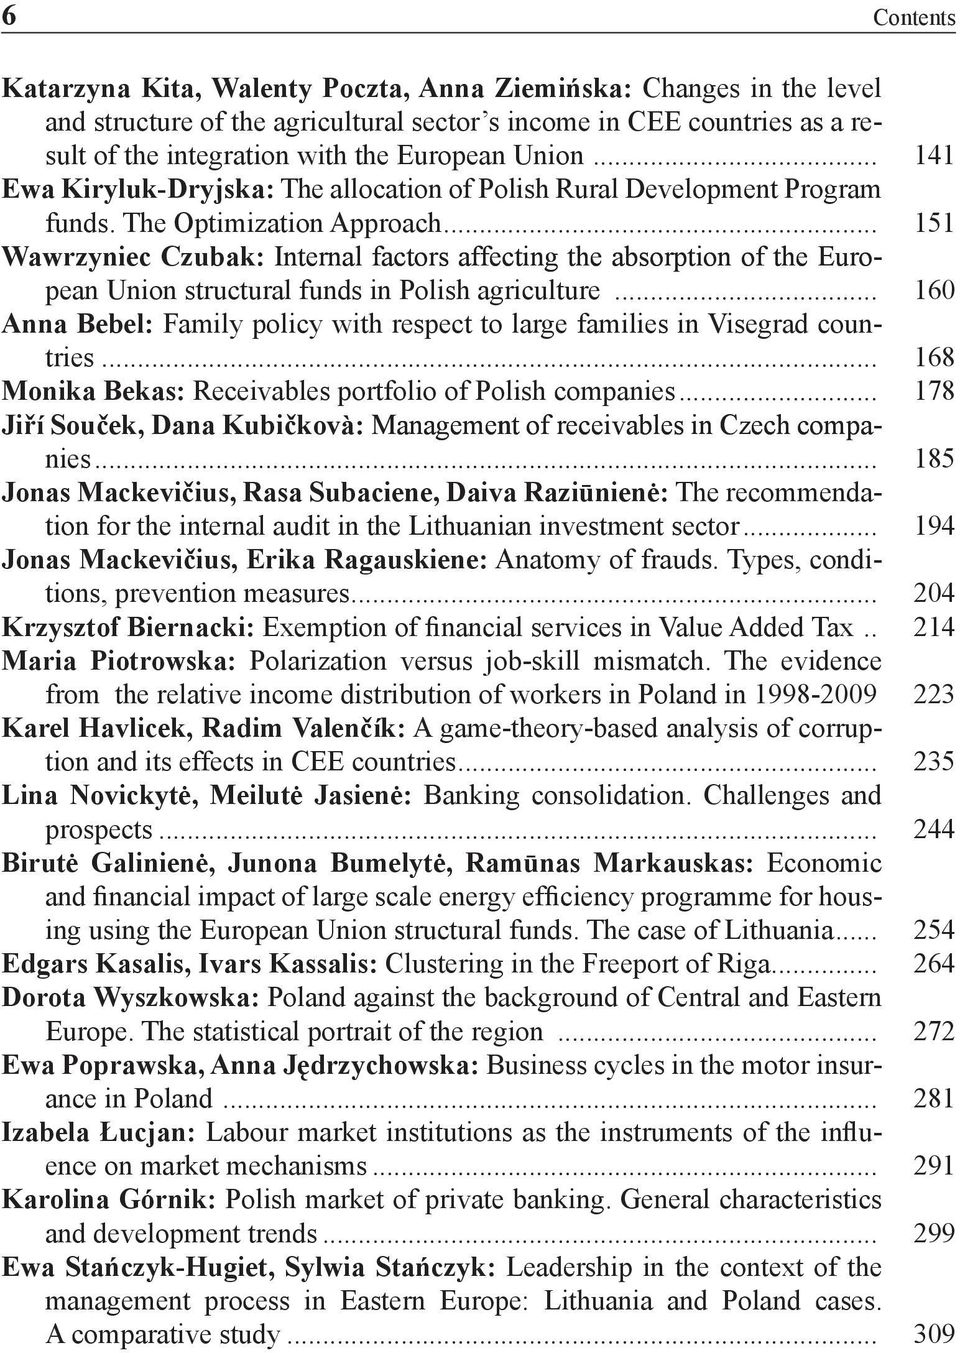 .. 151 Wawrzyniec Czubak: Internal factors affecting the absorption of the European Union structural funds in Polish agriculture.